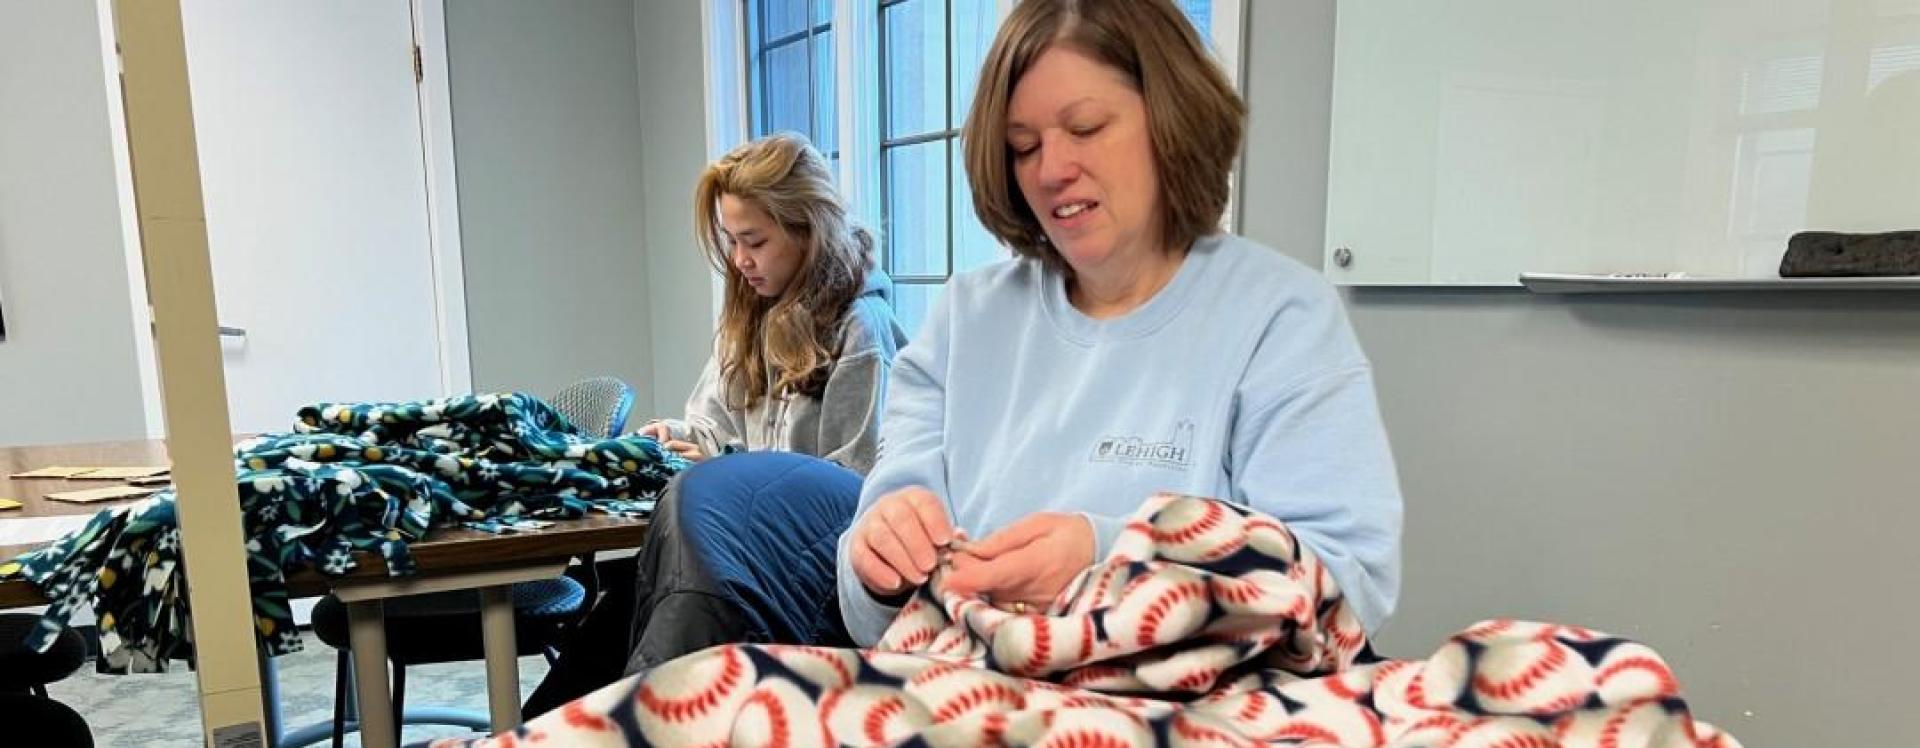 Carol Hill, director of Student Center Facilities, makes a no-sew blanket for Project Linus during the MLK National Day of Service. Project Linus makes new blankets for children experiencing hardship or trauma. Shown in the background is Ujin Khongorzul '26. Photo: Christina Tatu